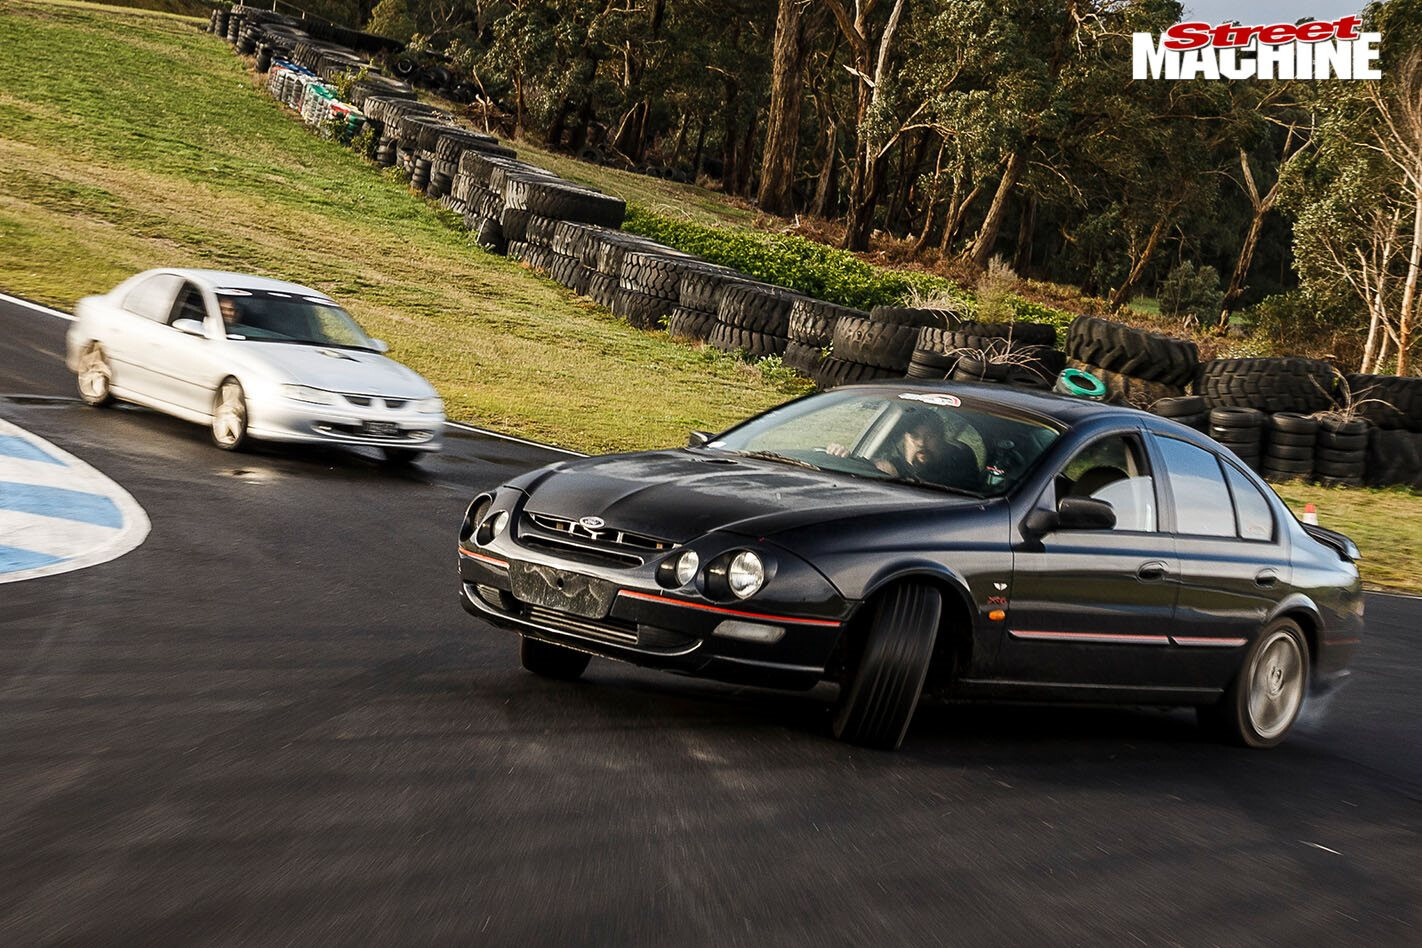 What’s next for the $2K Challenge cars – Carnage Plus